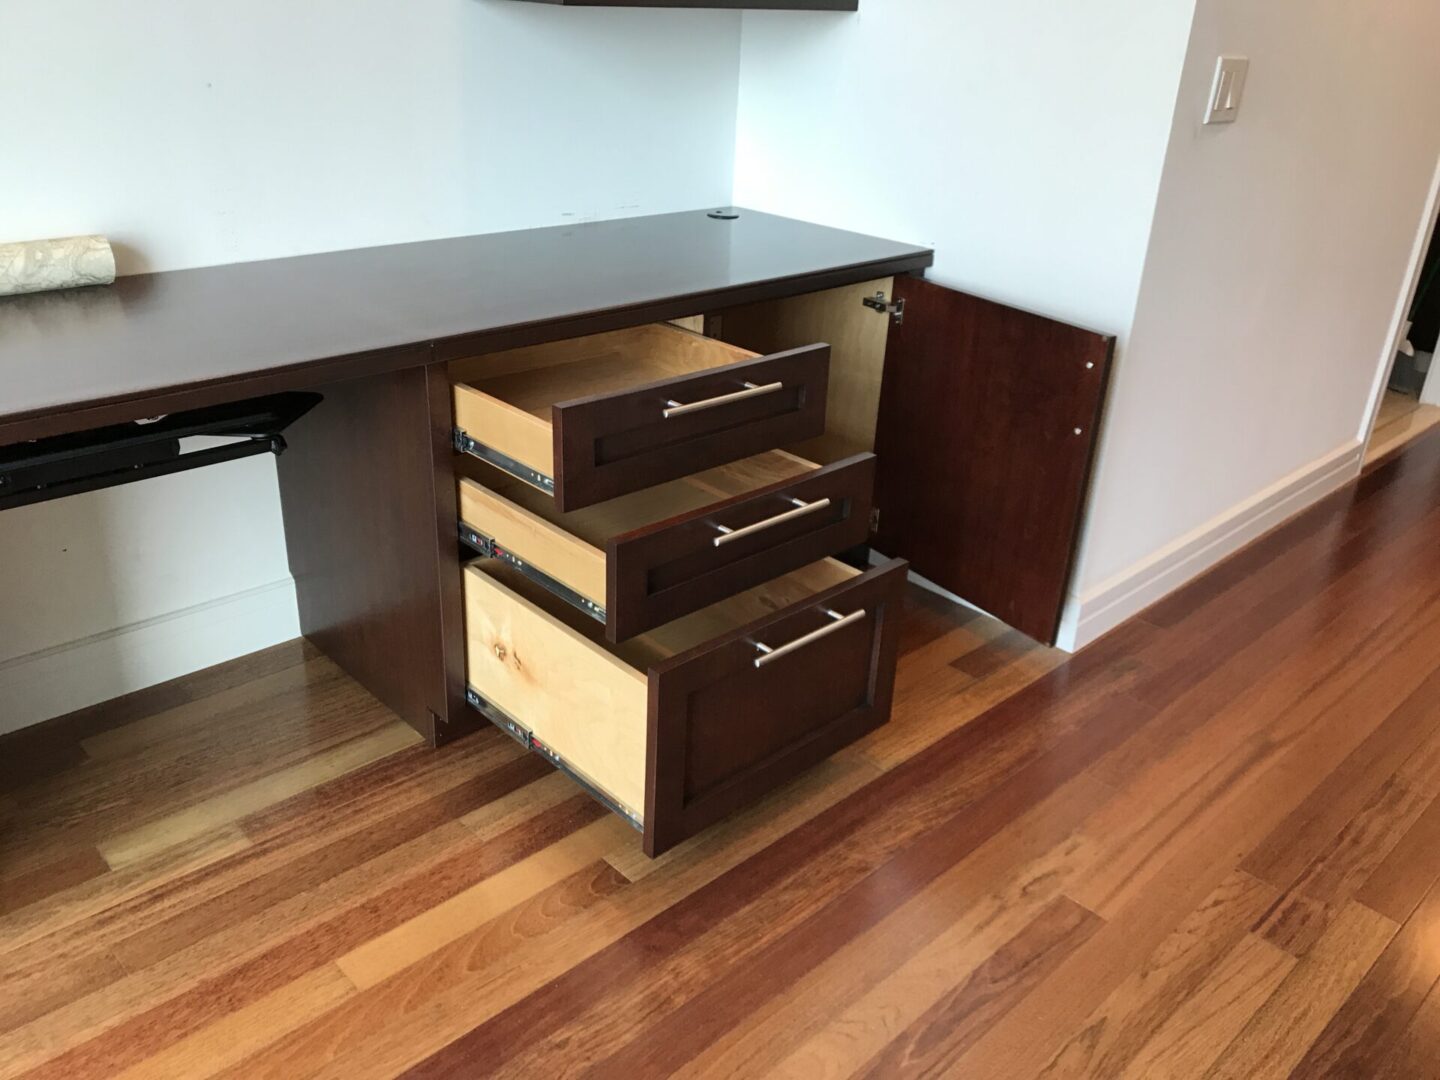 A bunch of wooden cabinets opened and wooden floor